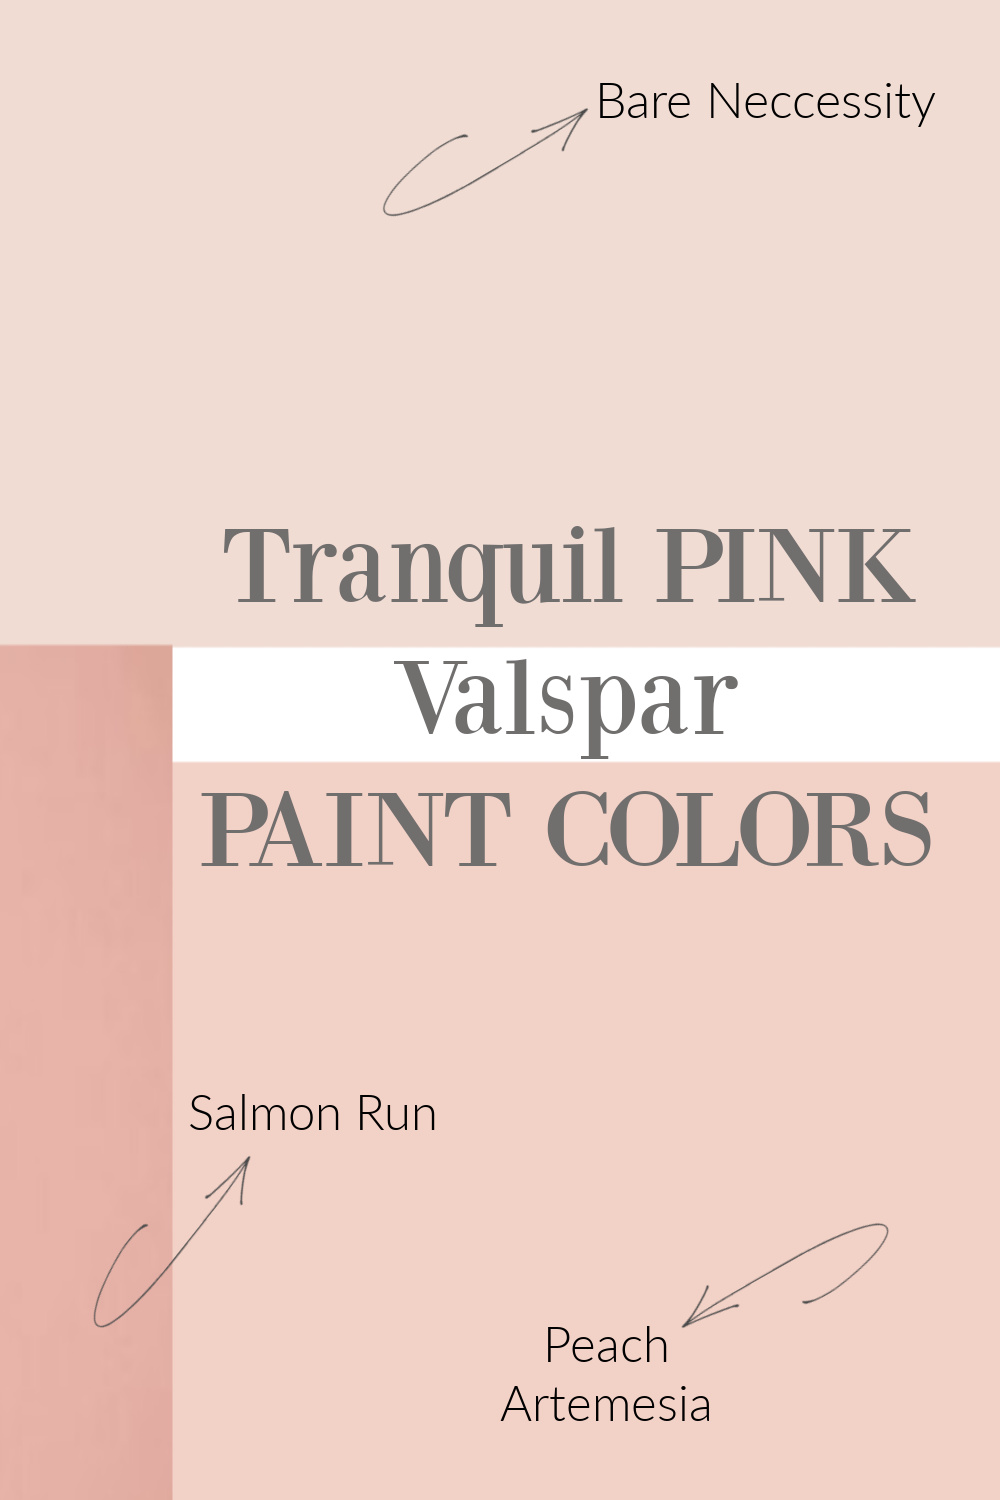 Pink paint colors from Valspar to try - Hello Lovely. #paintcolors #pinkpaint